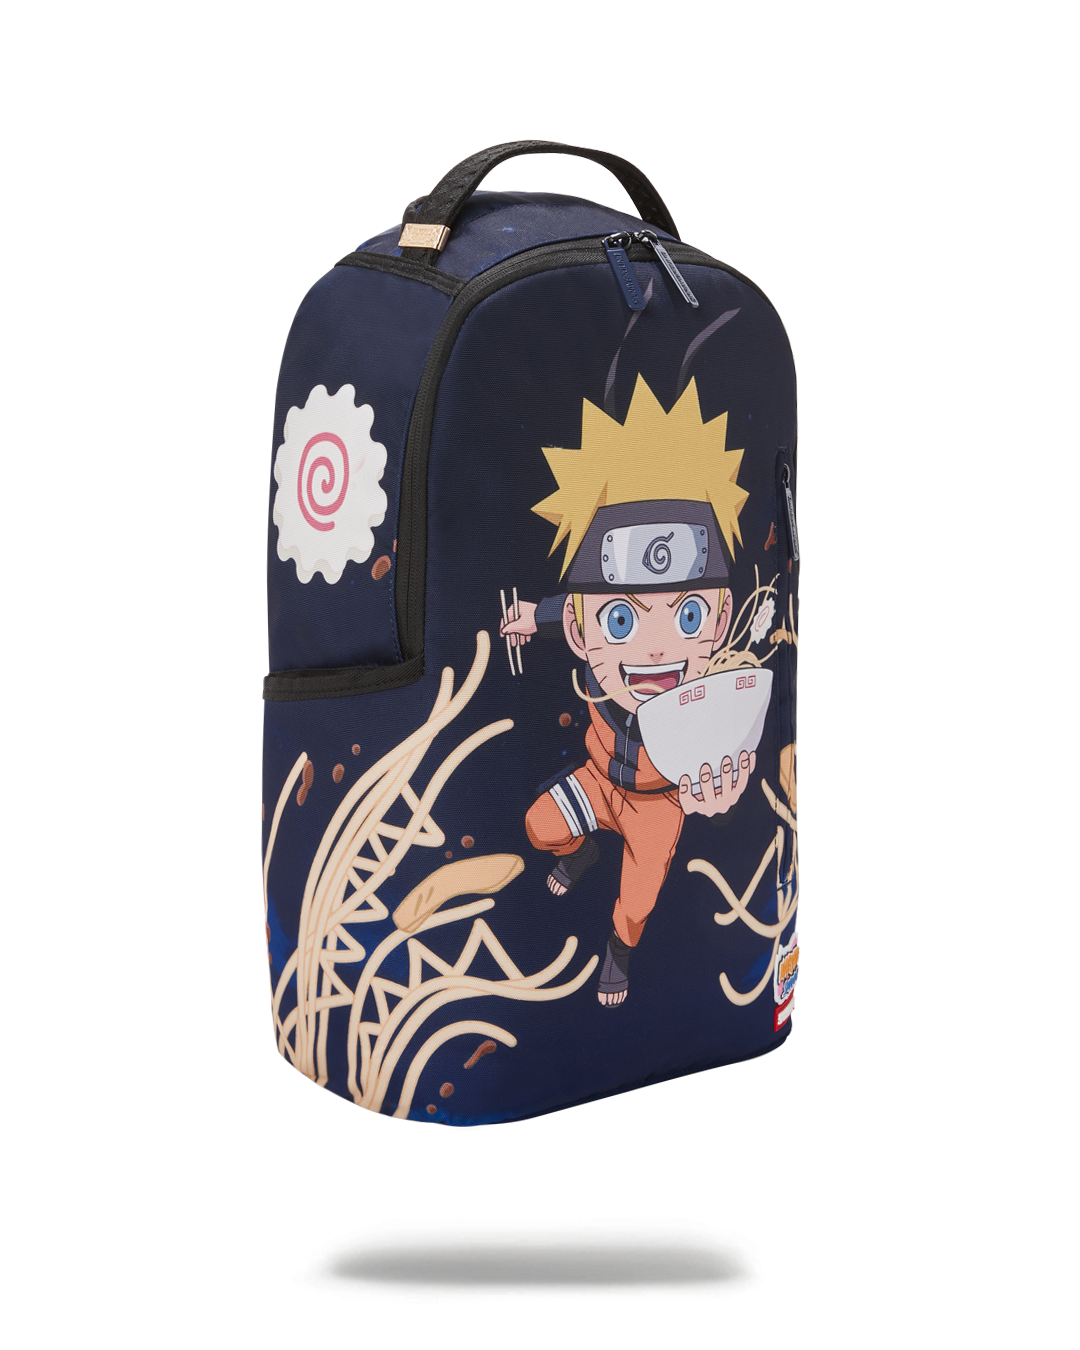 SPRAYGROUND NARUTO RAMEN BACKPACK NEW WITH TAGS OFFICIAL